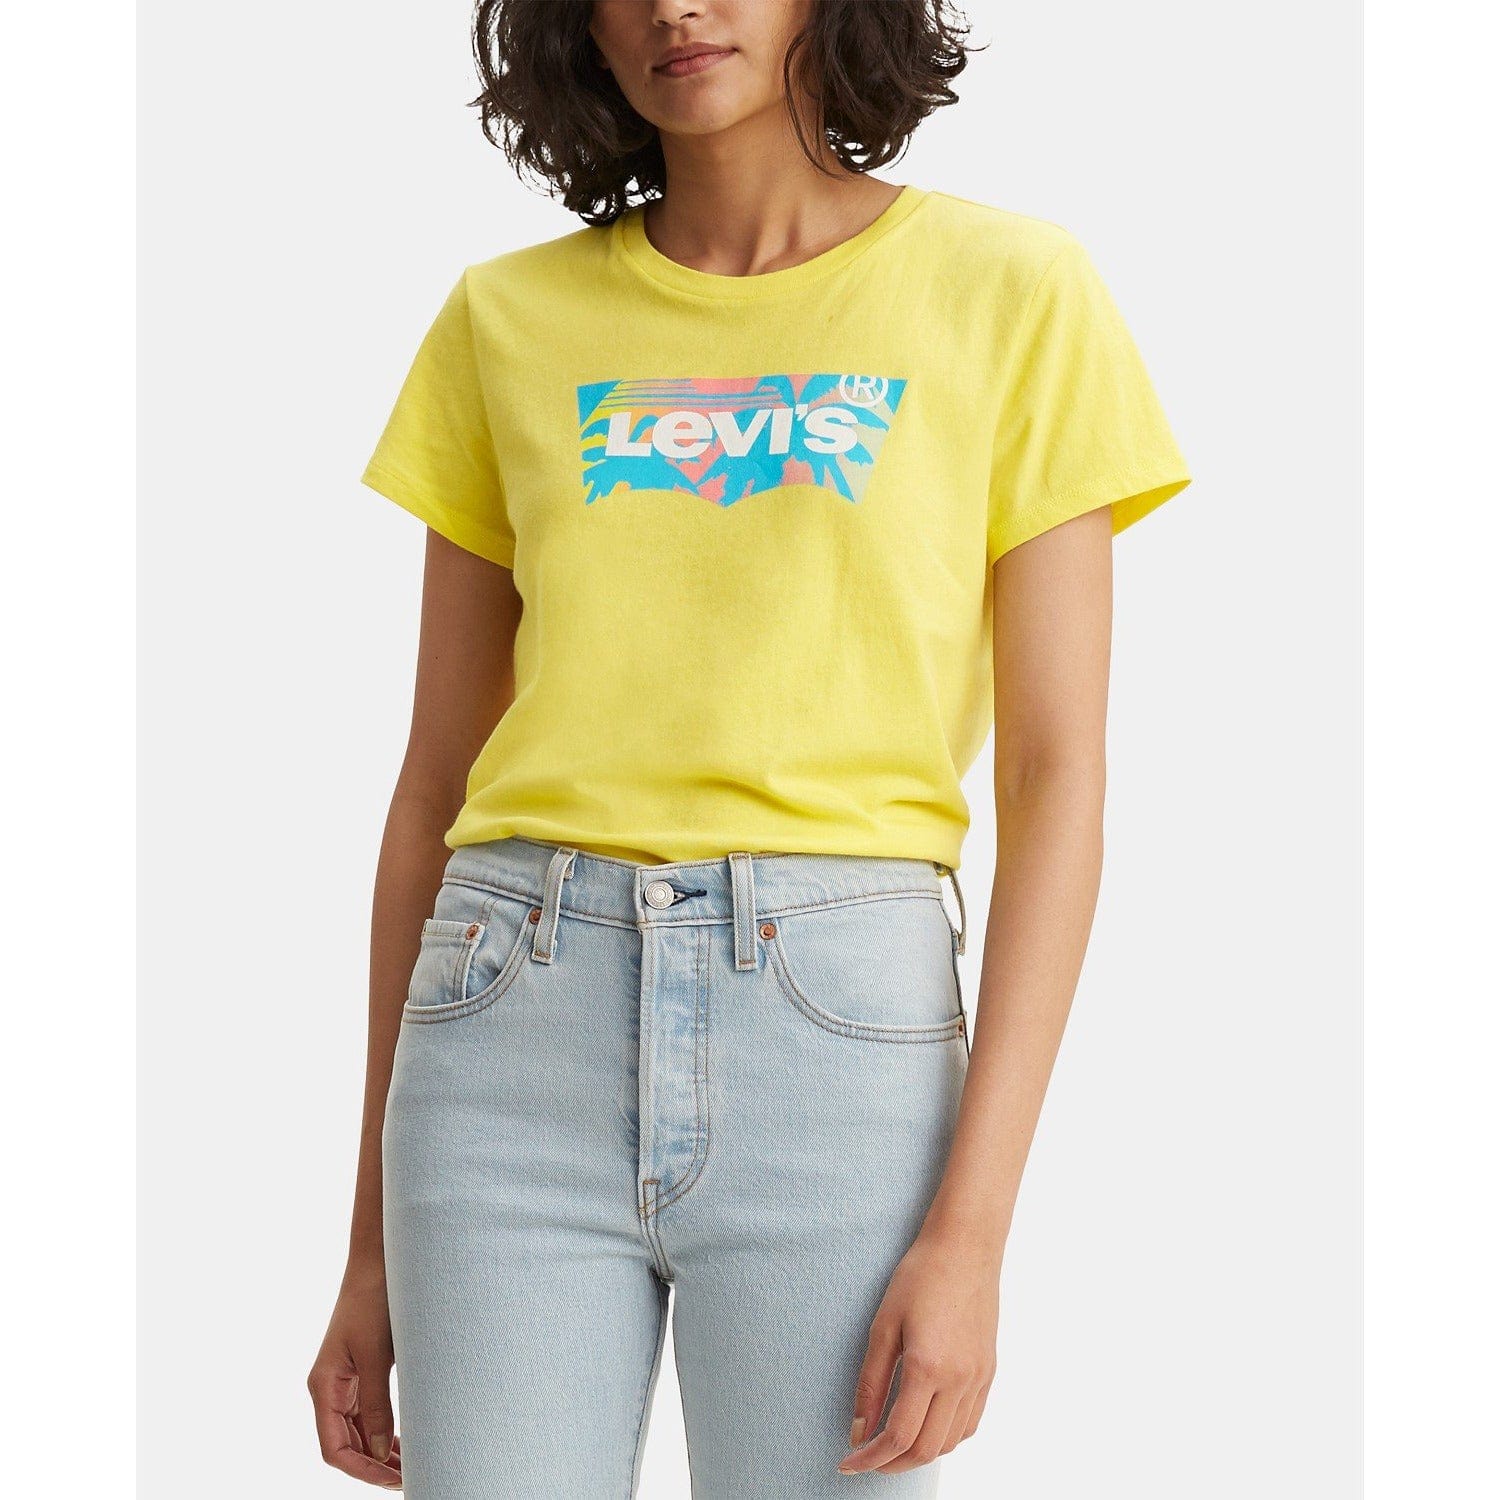 Levi's Perfect Graphic T-Shirt - The Pink Pigs, A Compassionate Boutique